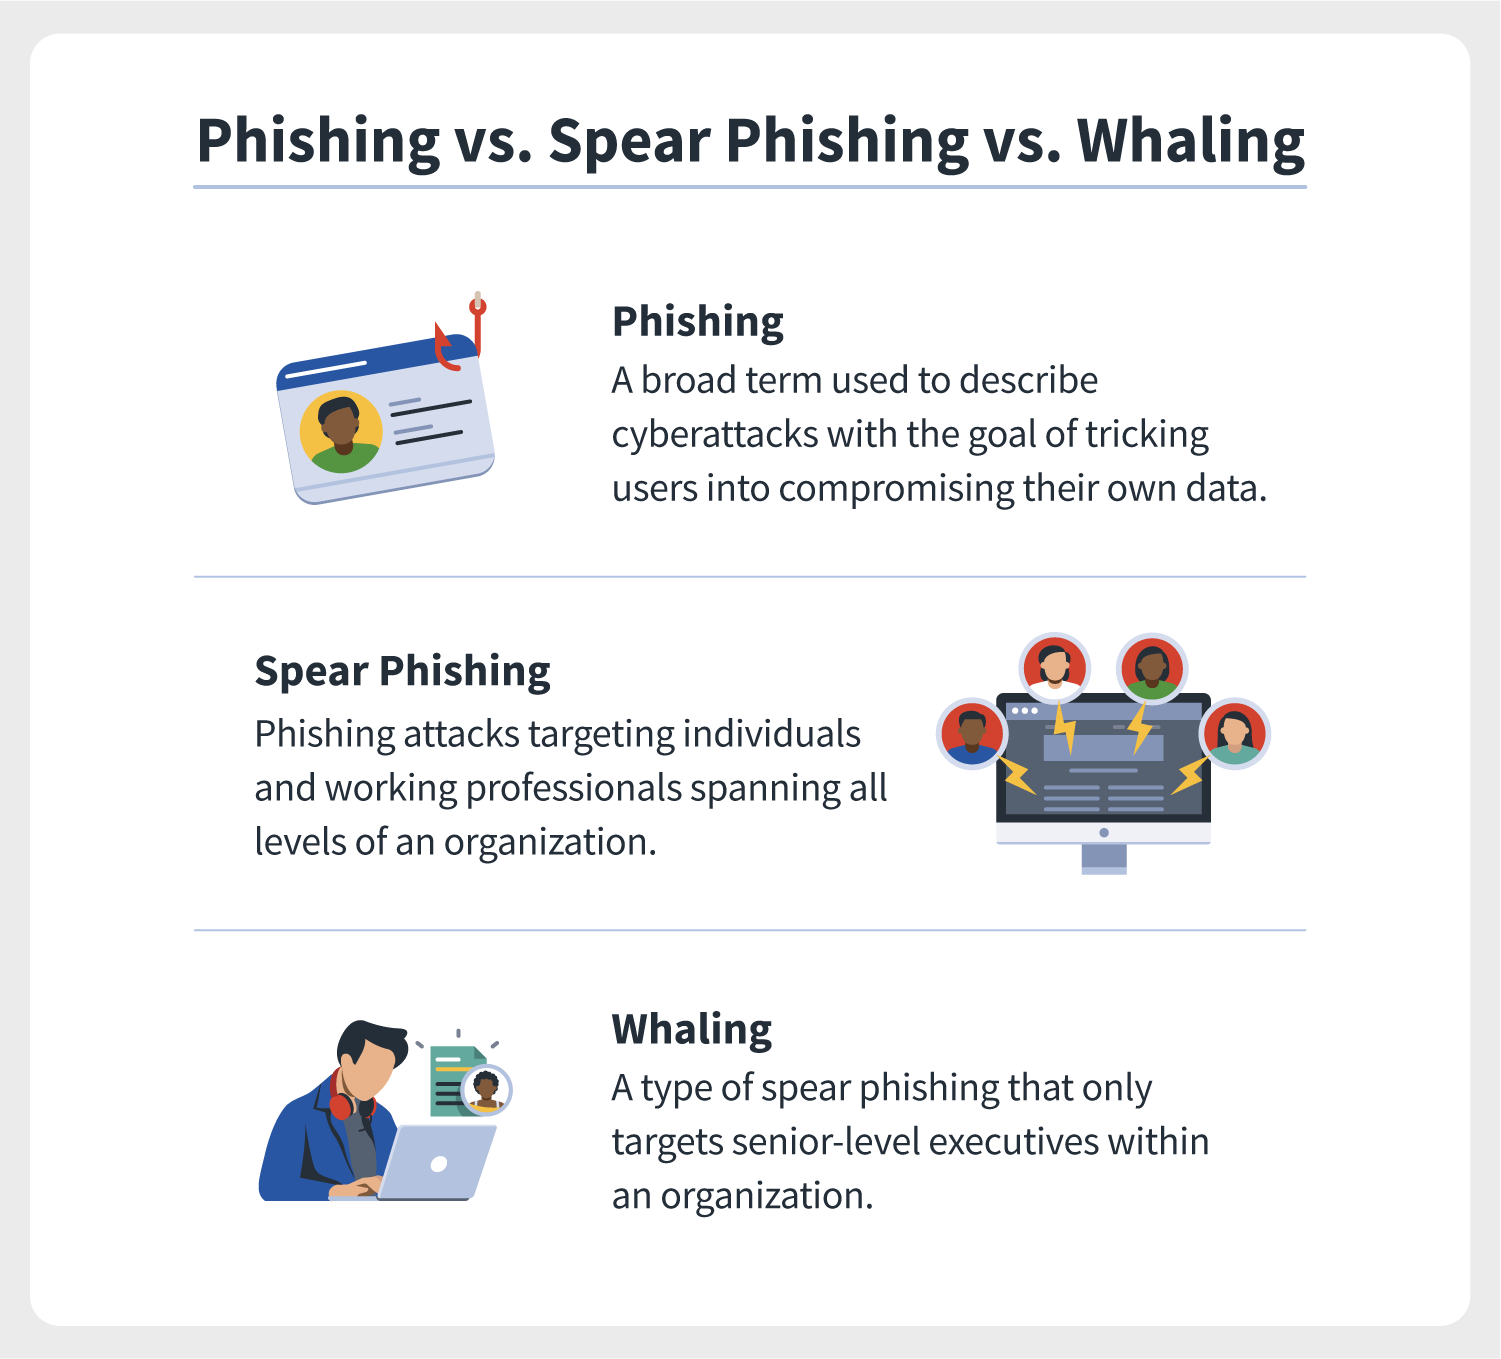 Three illustrations accompany the differences between phishing, spear phishing, and whaling attacks.